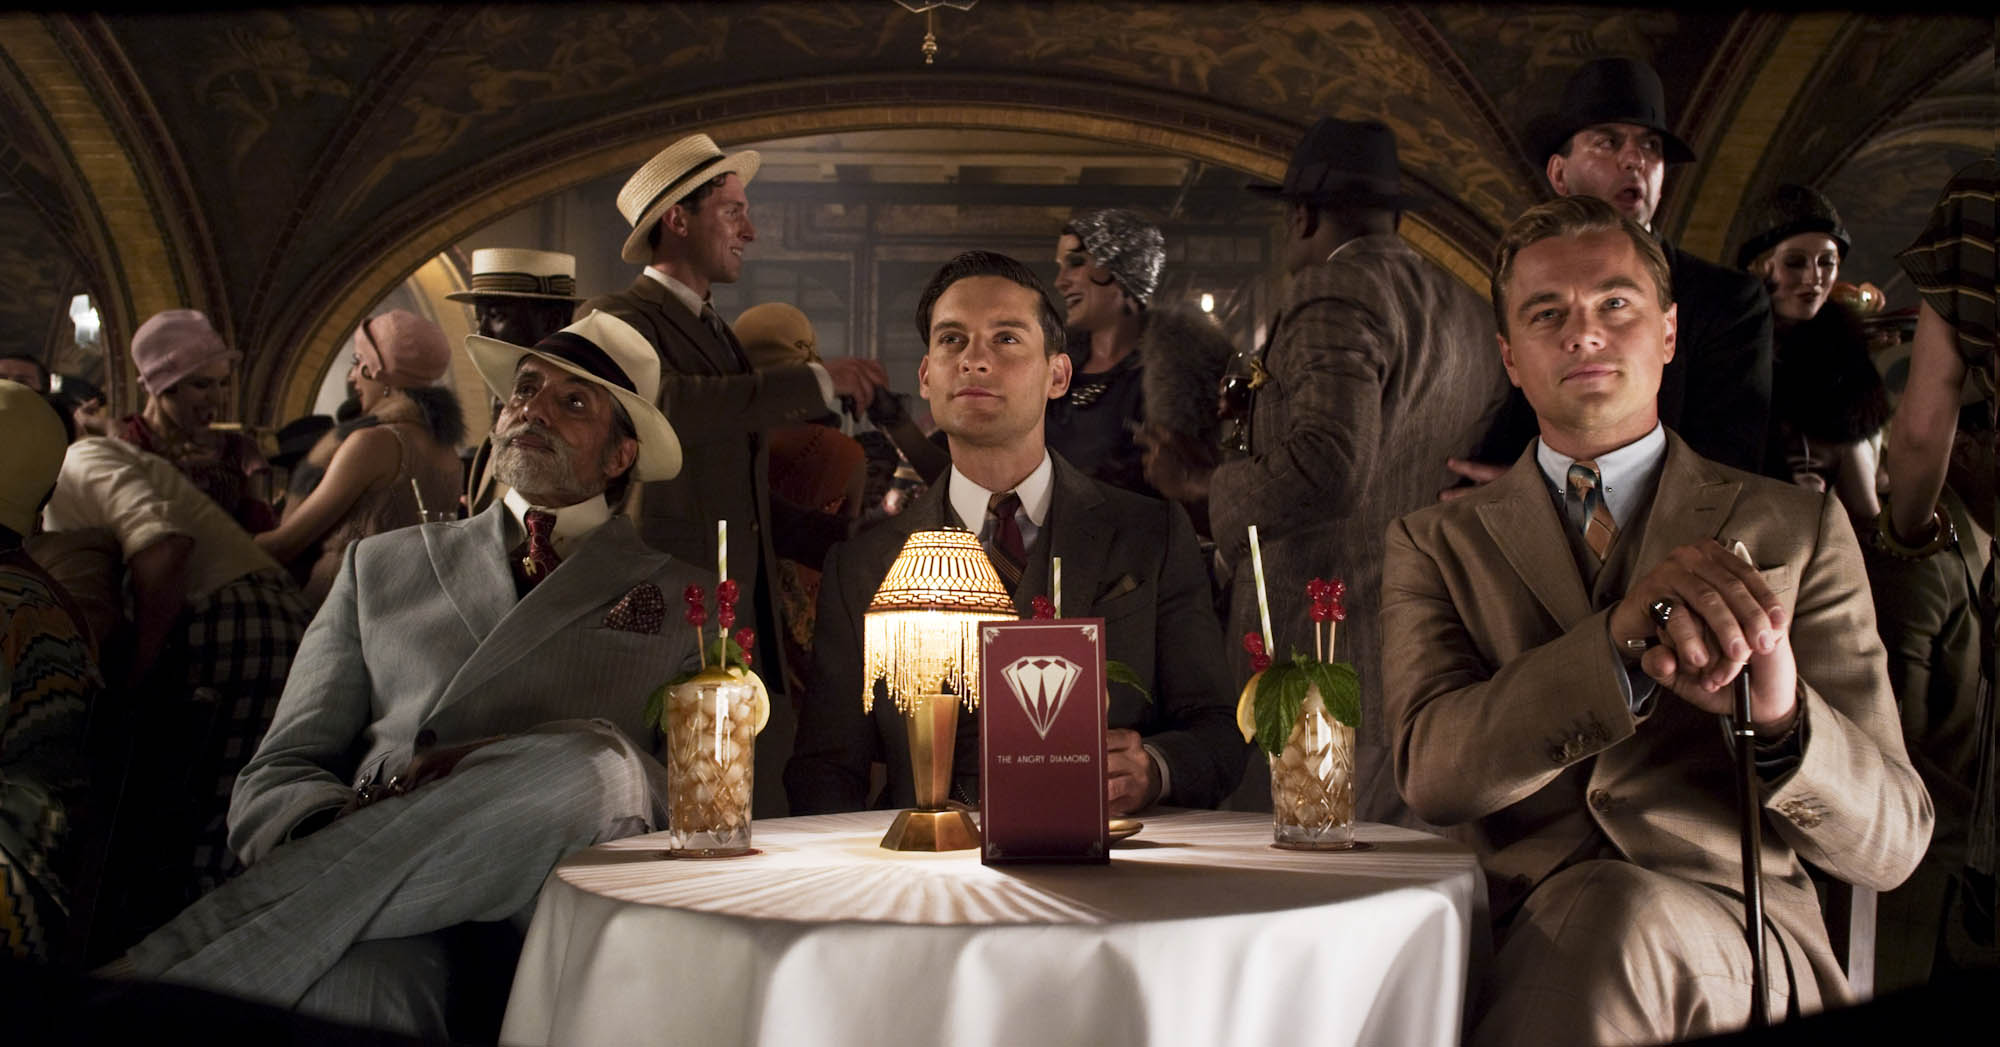 The Great Gatsby Computer Wallpapers, Desktop Backgrounds ...